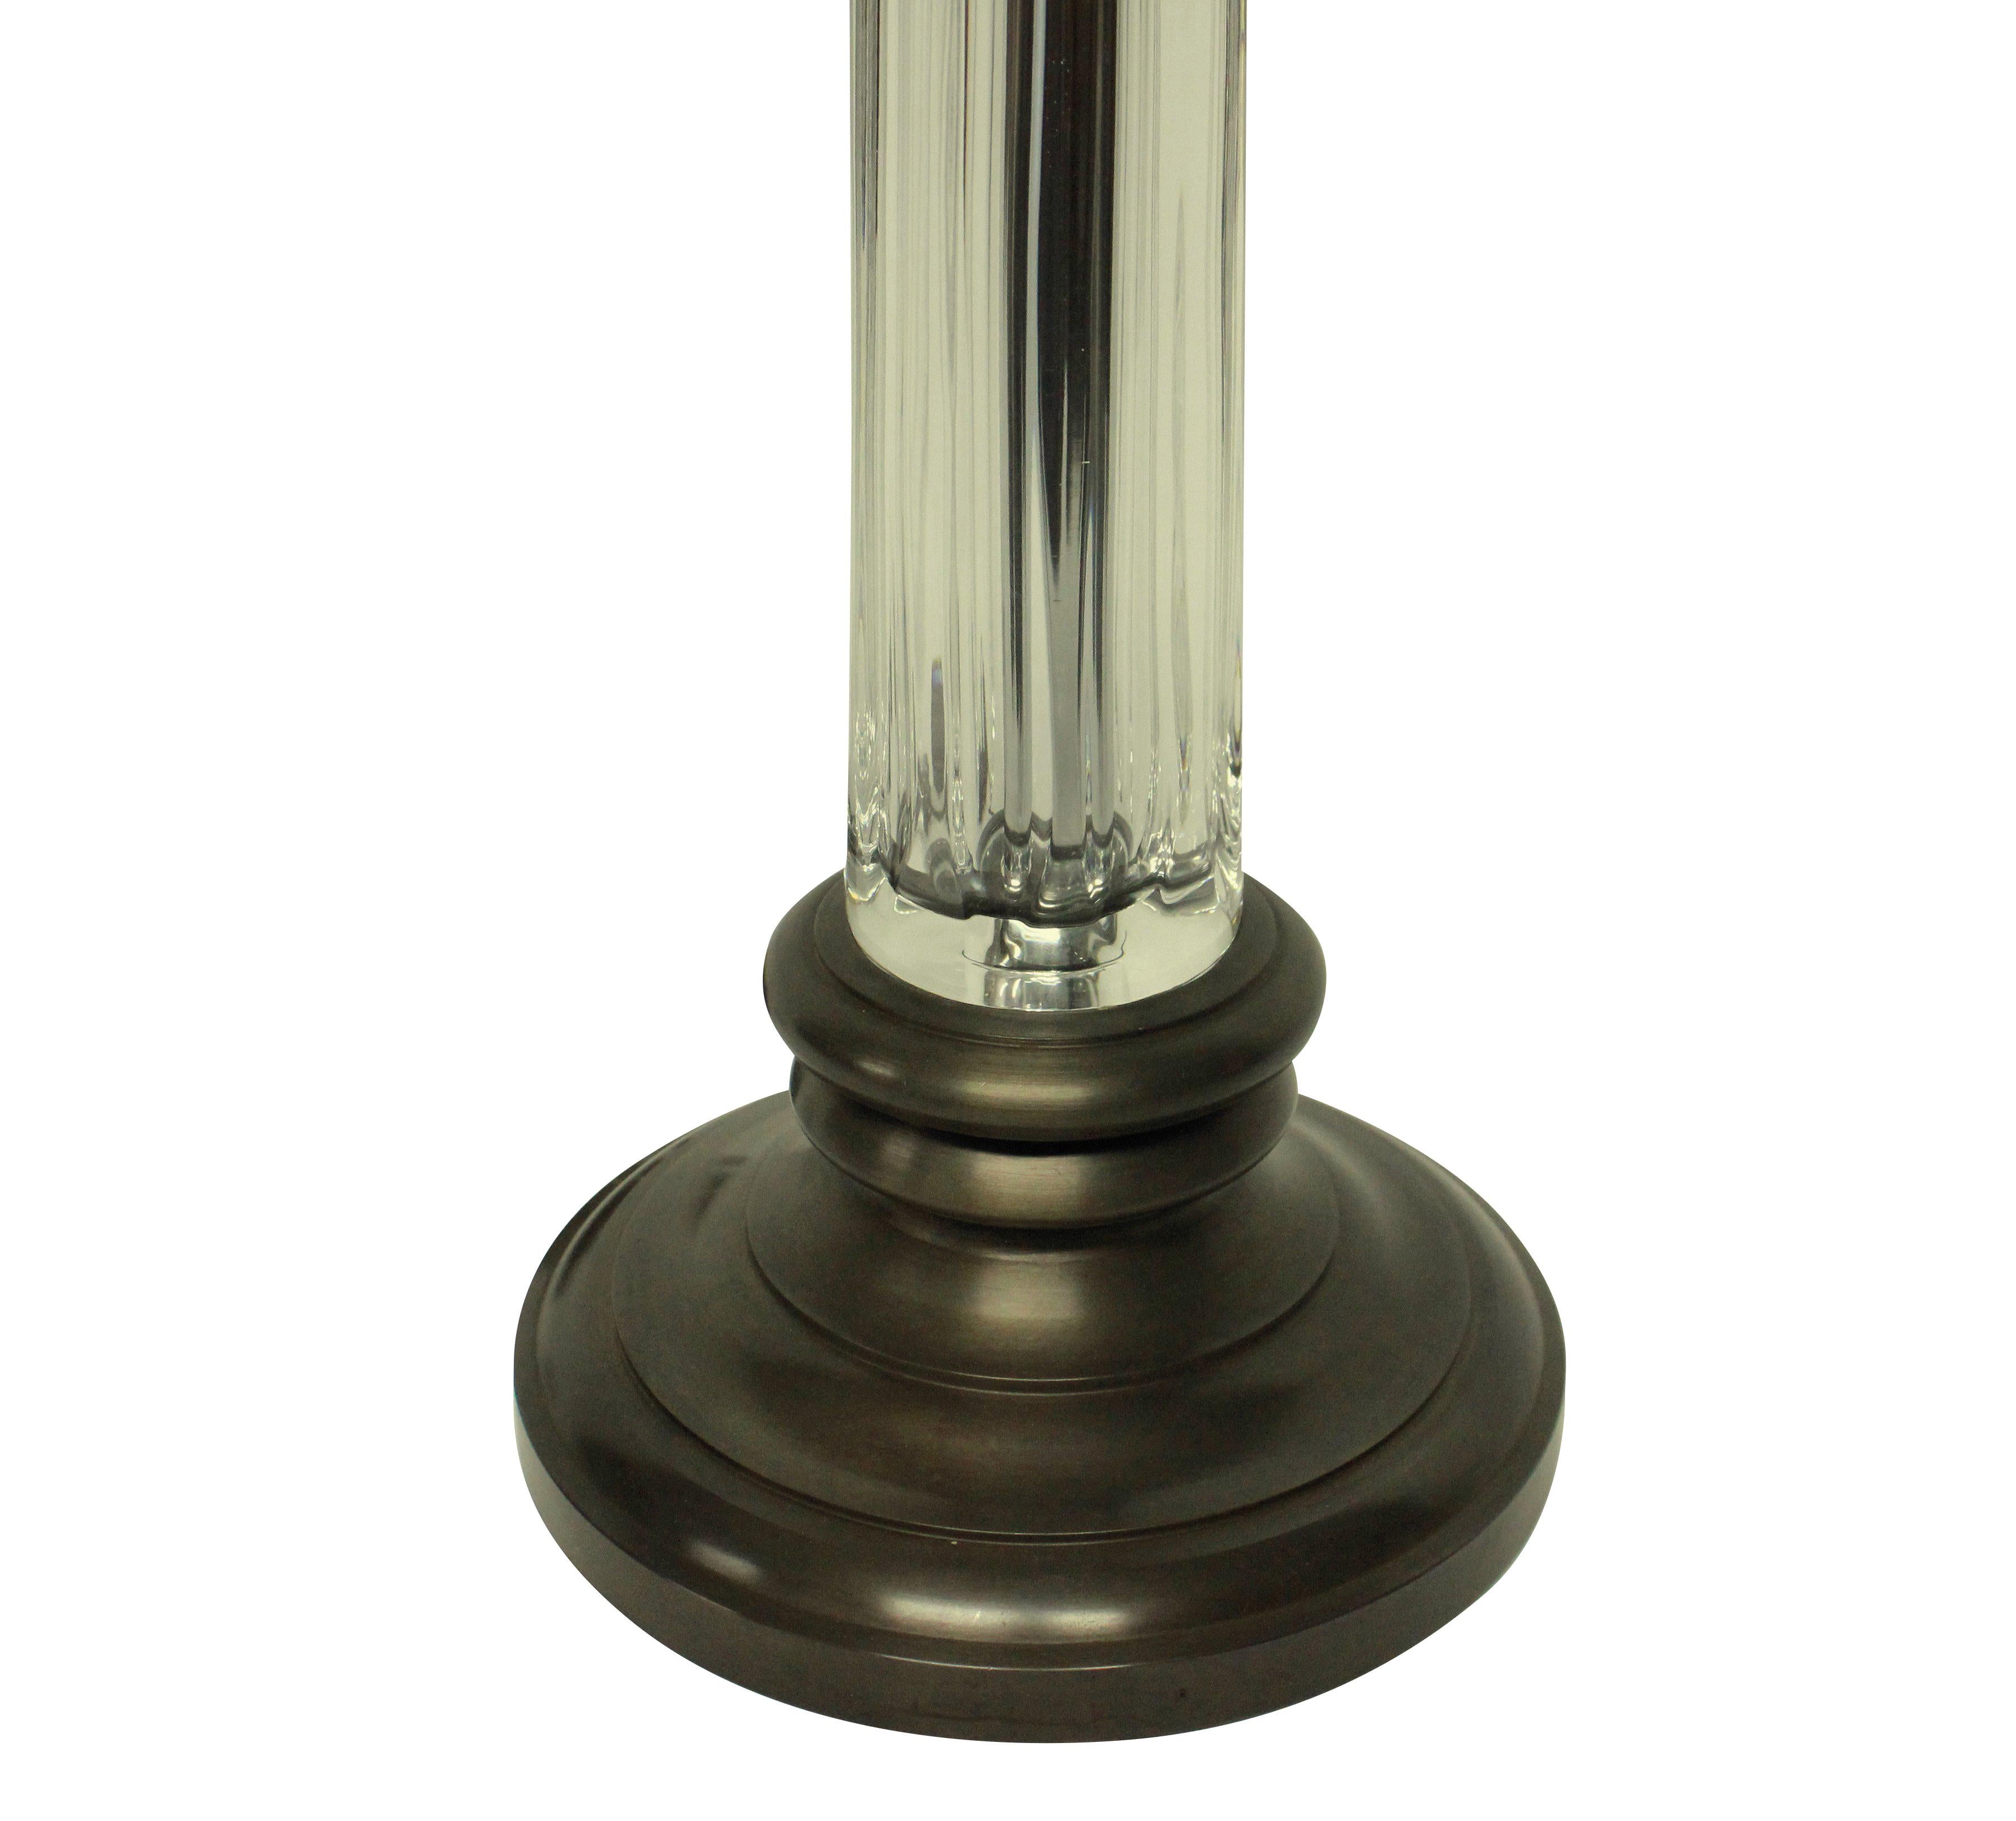 A pair of English cut-glass column lamps with bronzed bases and fittings. Newly electrified with brown silk cords.

Price here for a pair.